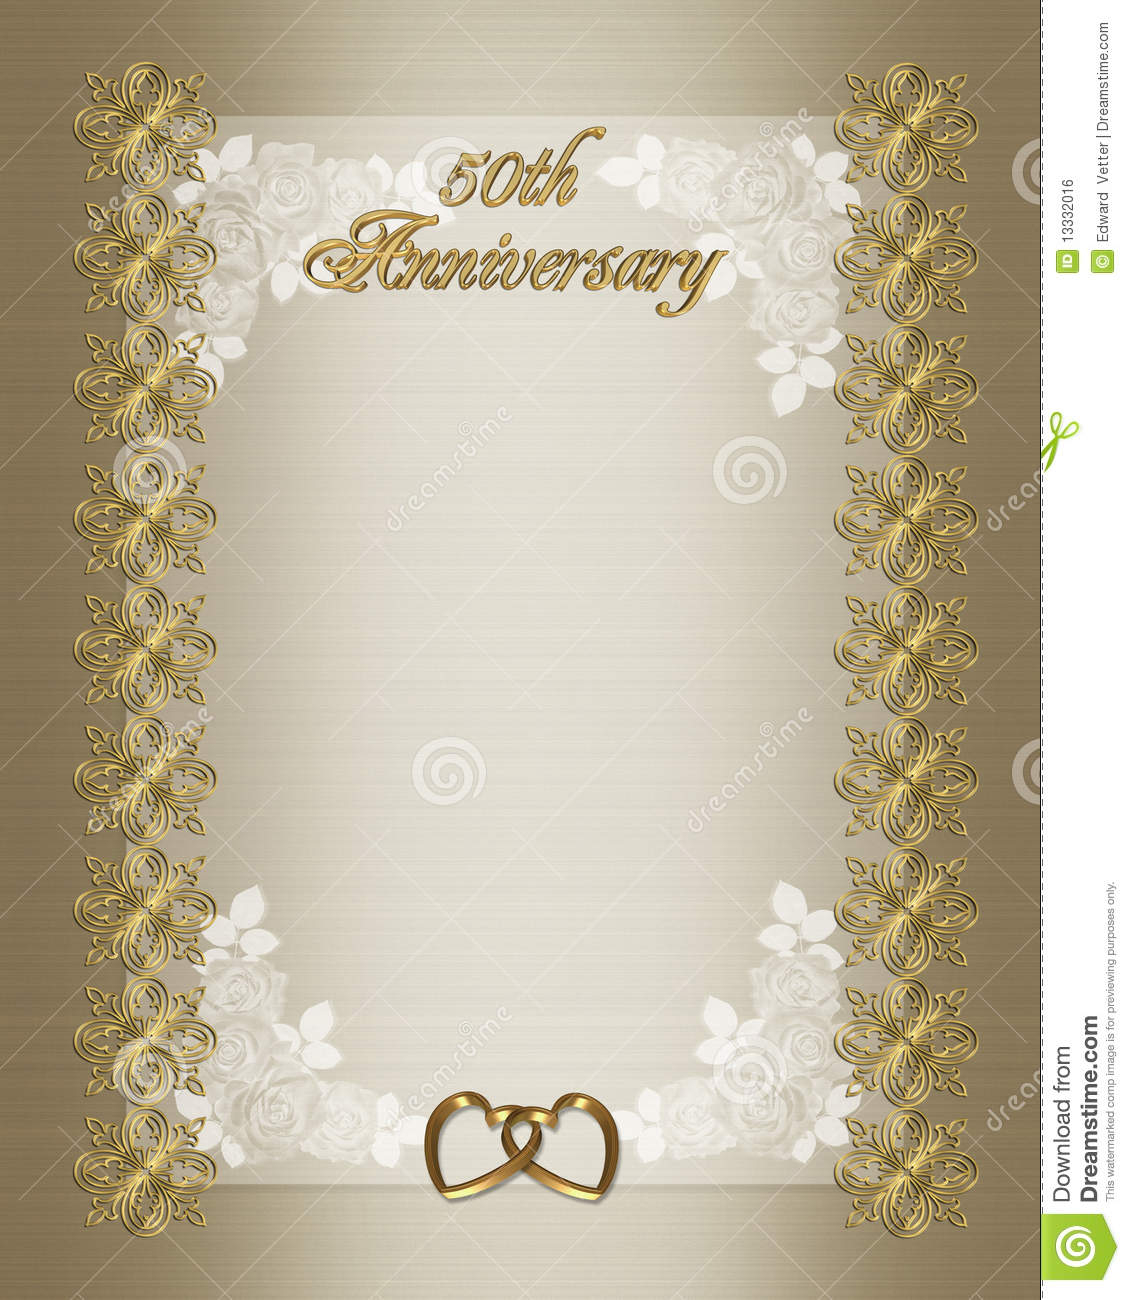 50th Wedding Anniversary Invitation Template Stock Illustration with size 1130 X 1300